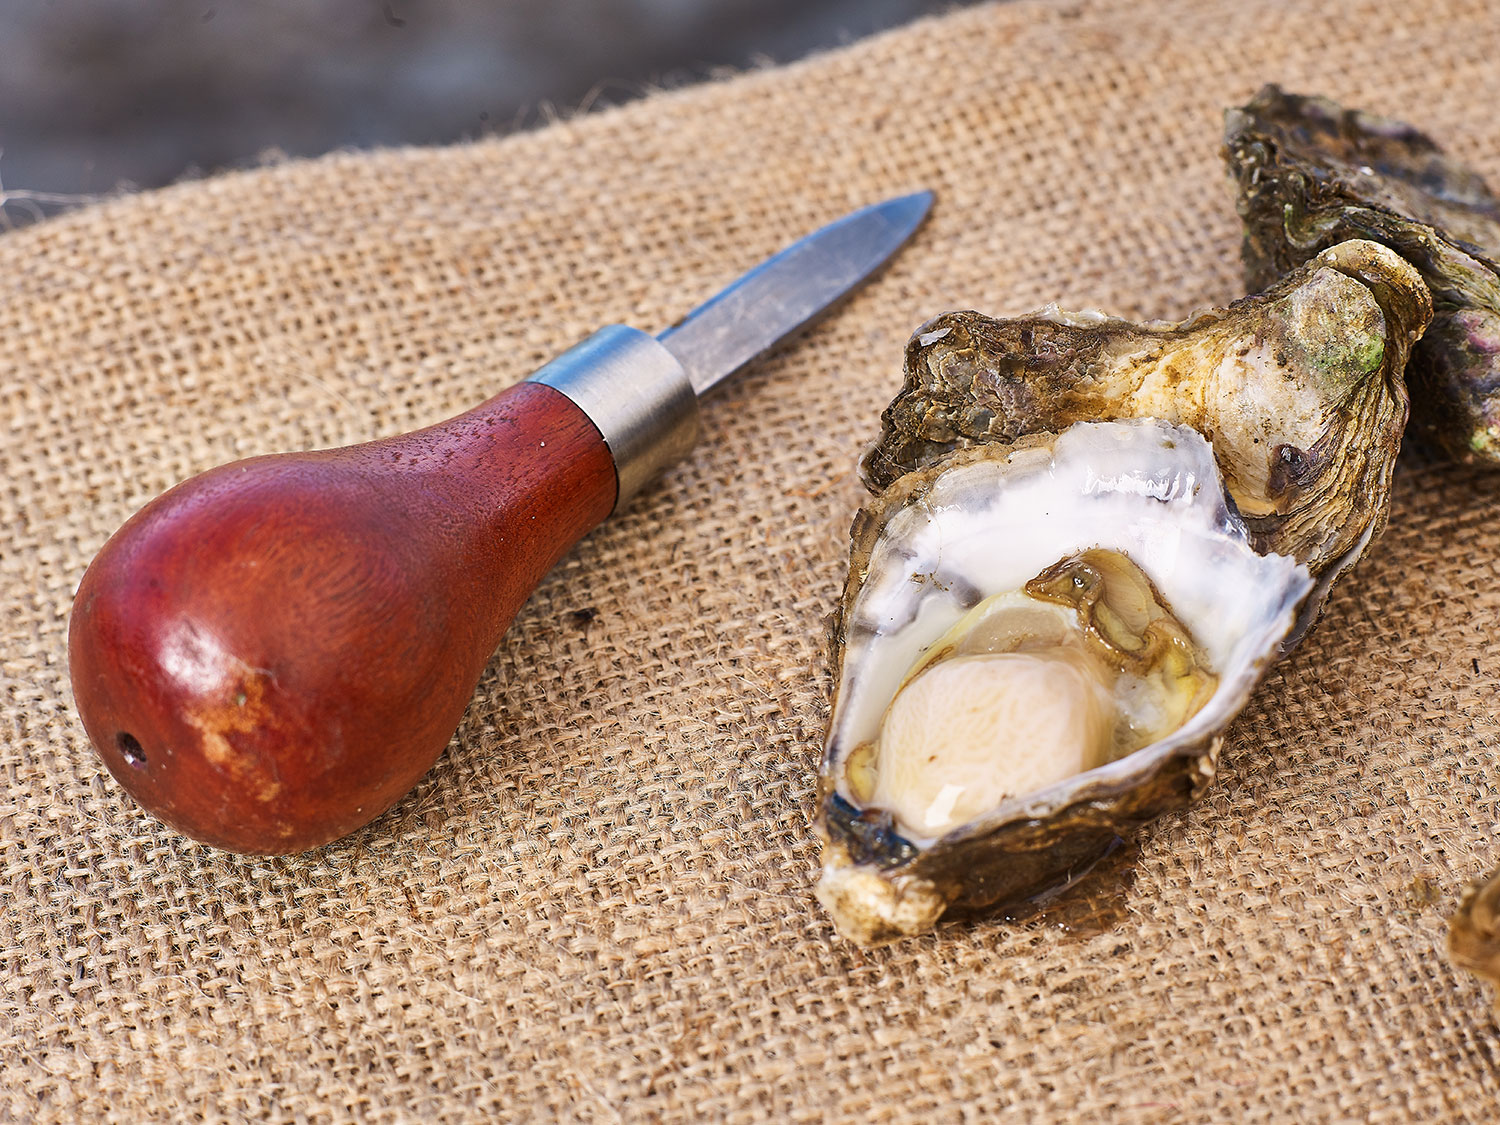 Nothing beats the quality and purity of freshly-shucked Australian oysters